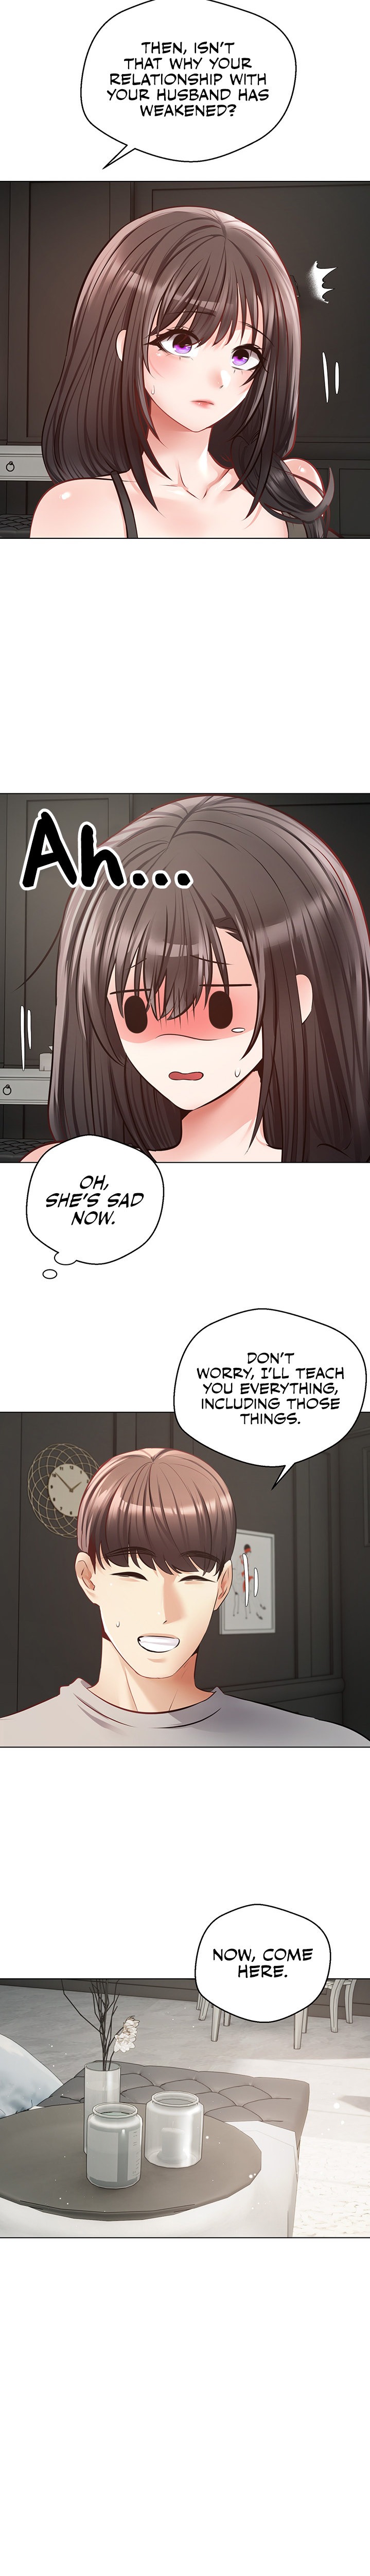 Desire Realization App - Chapter 27 Page 18